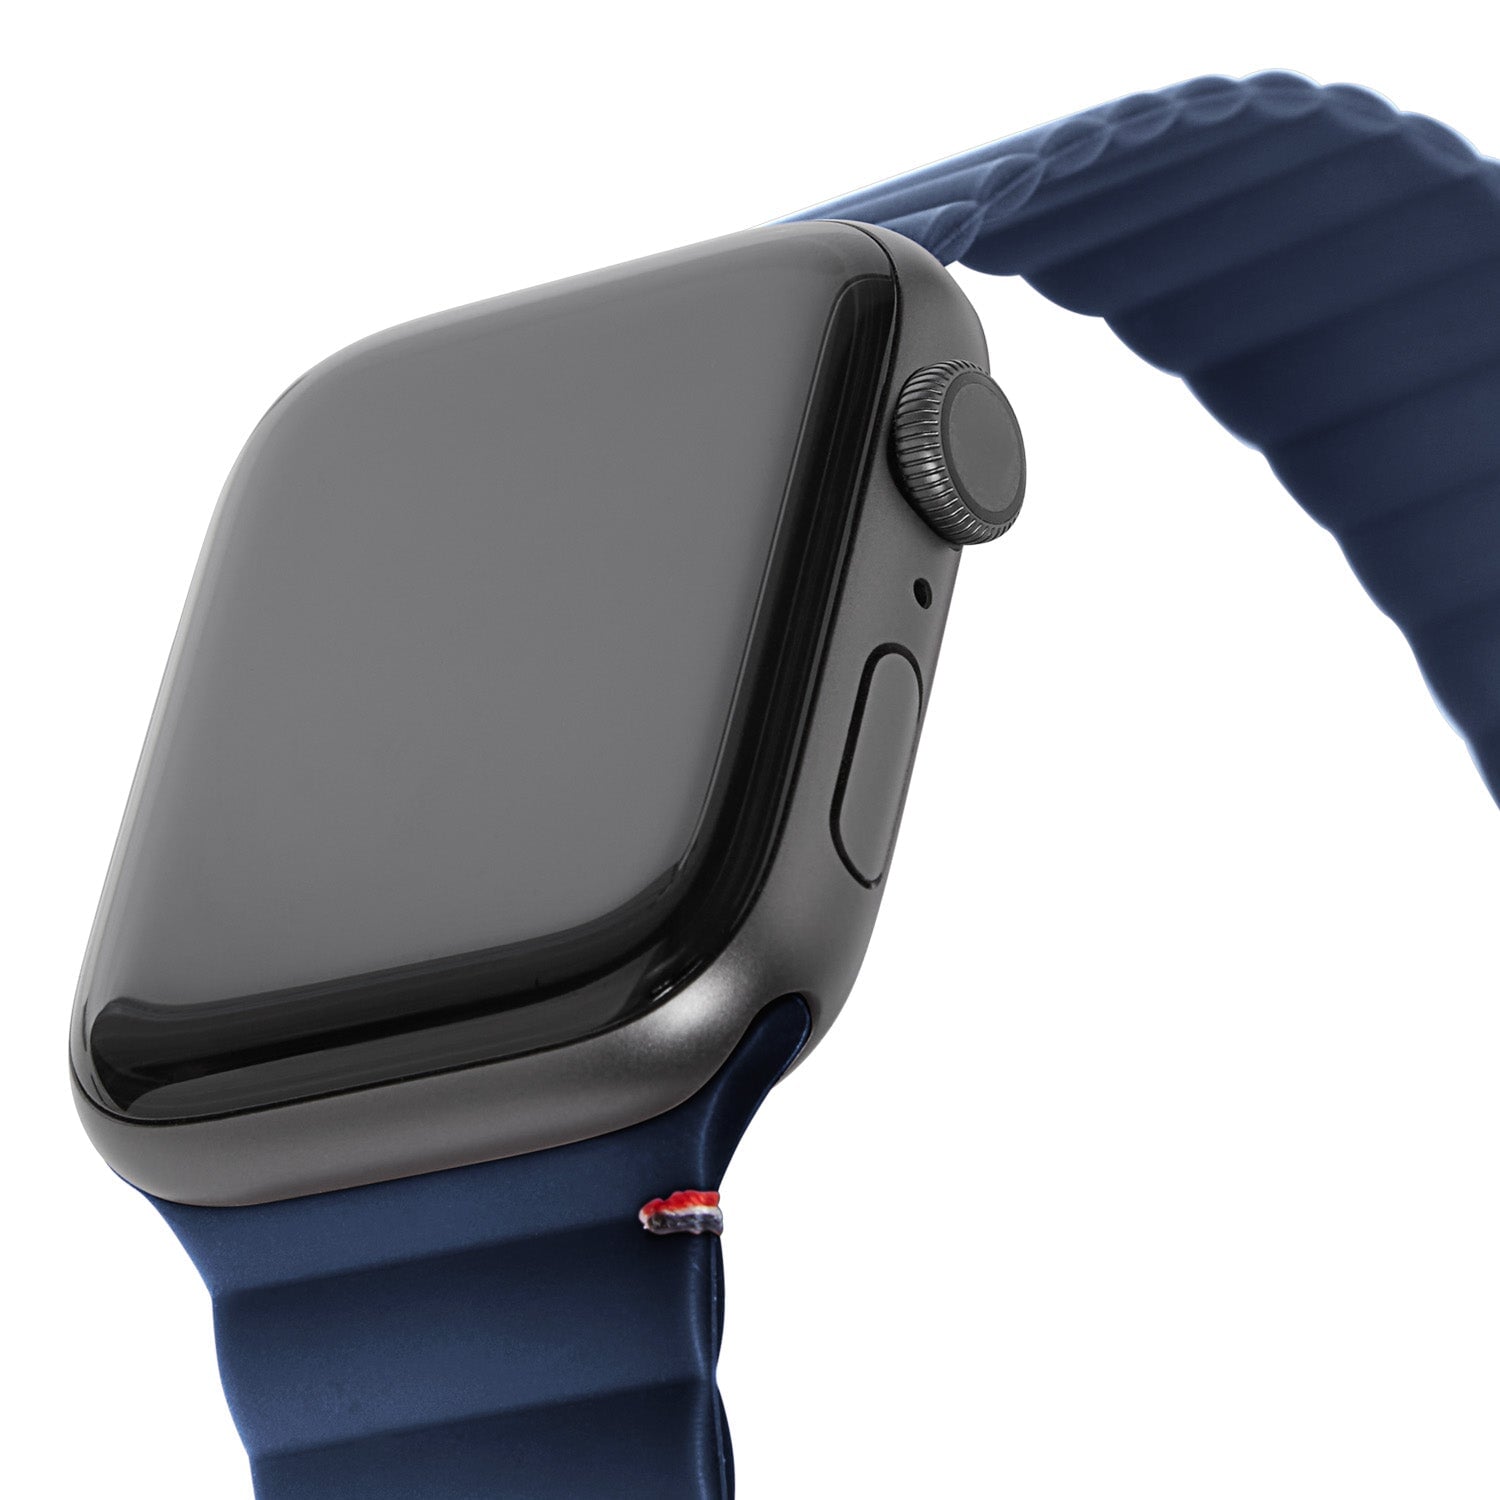 Silicone Magnetic Traction Strap Lite Apple Watch SE 44mm, Matte Navy